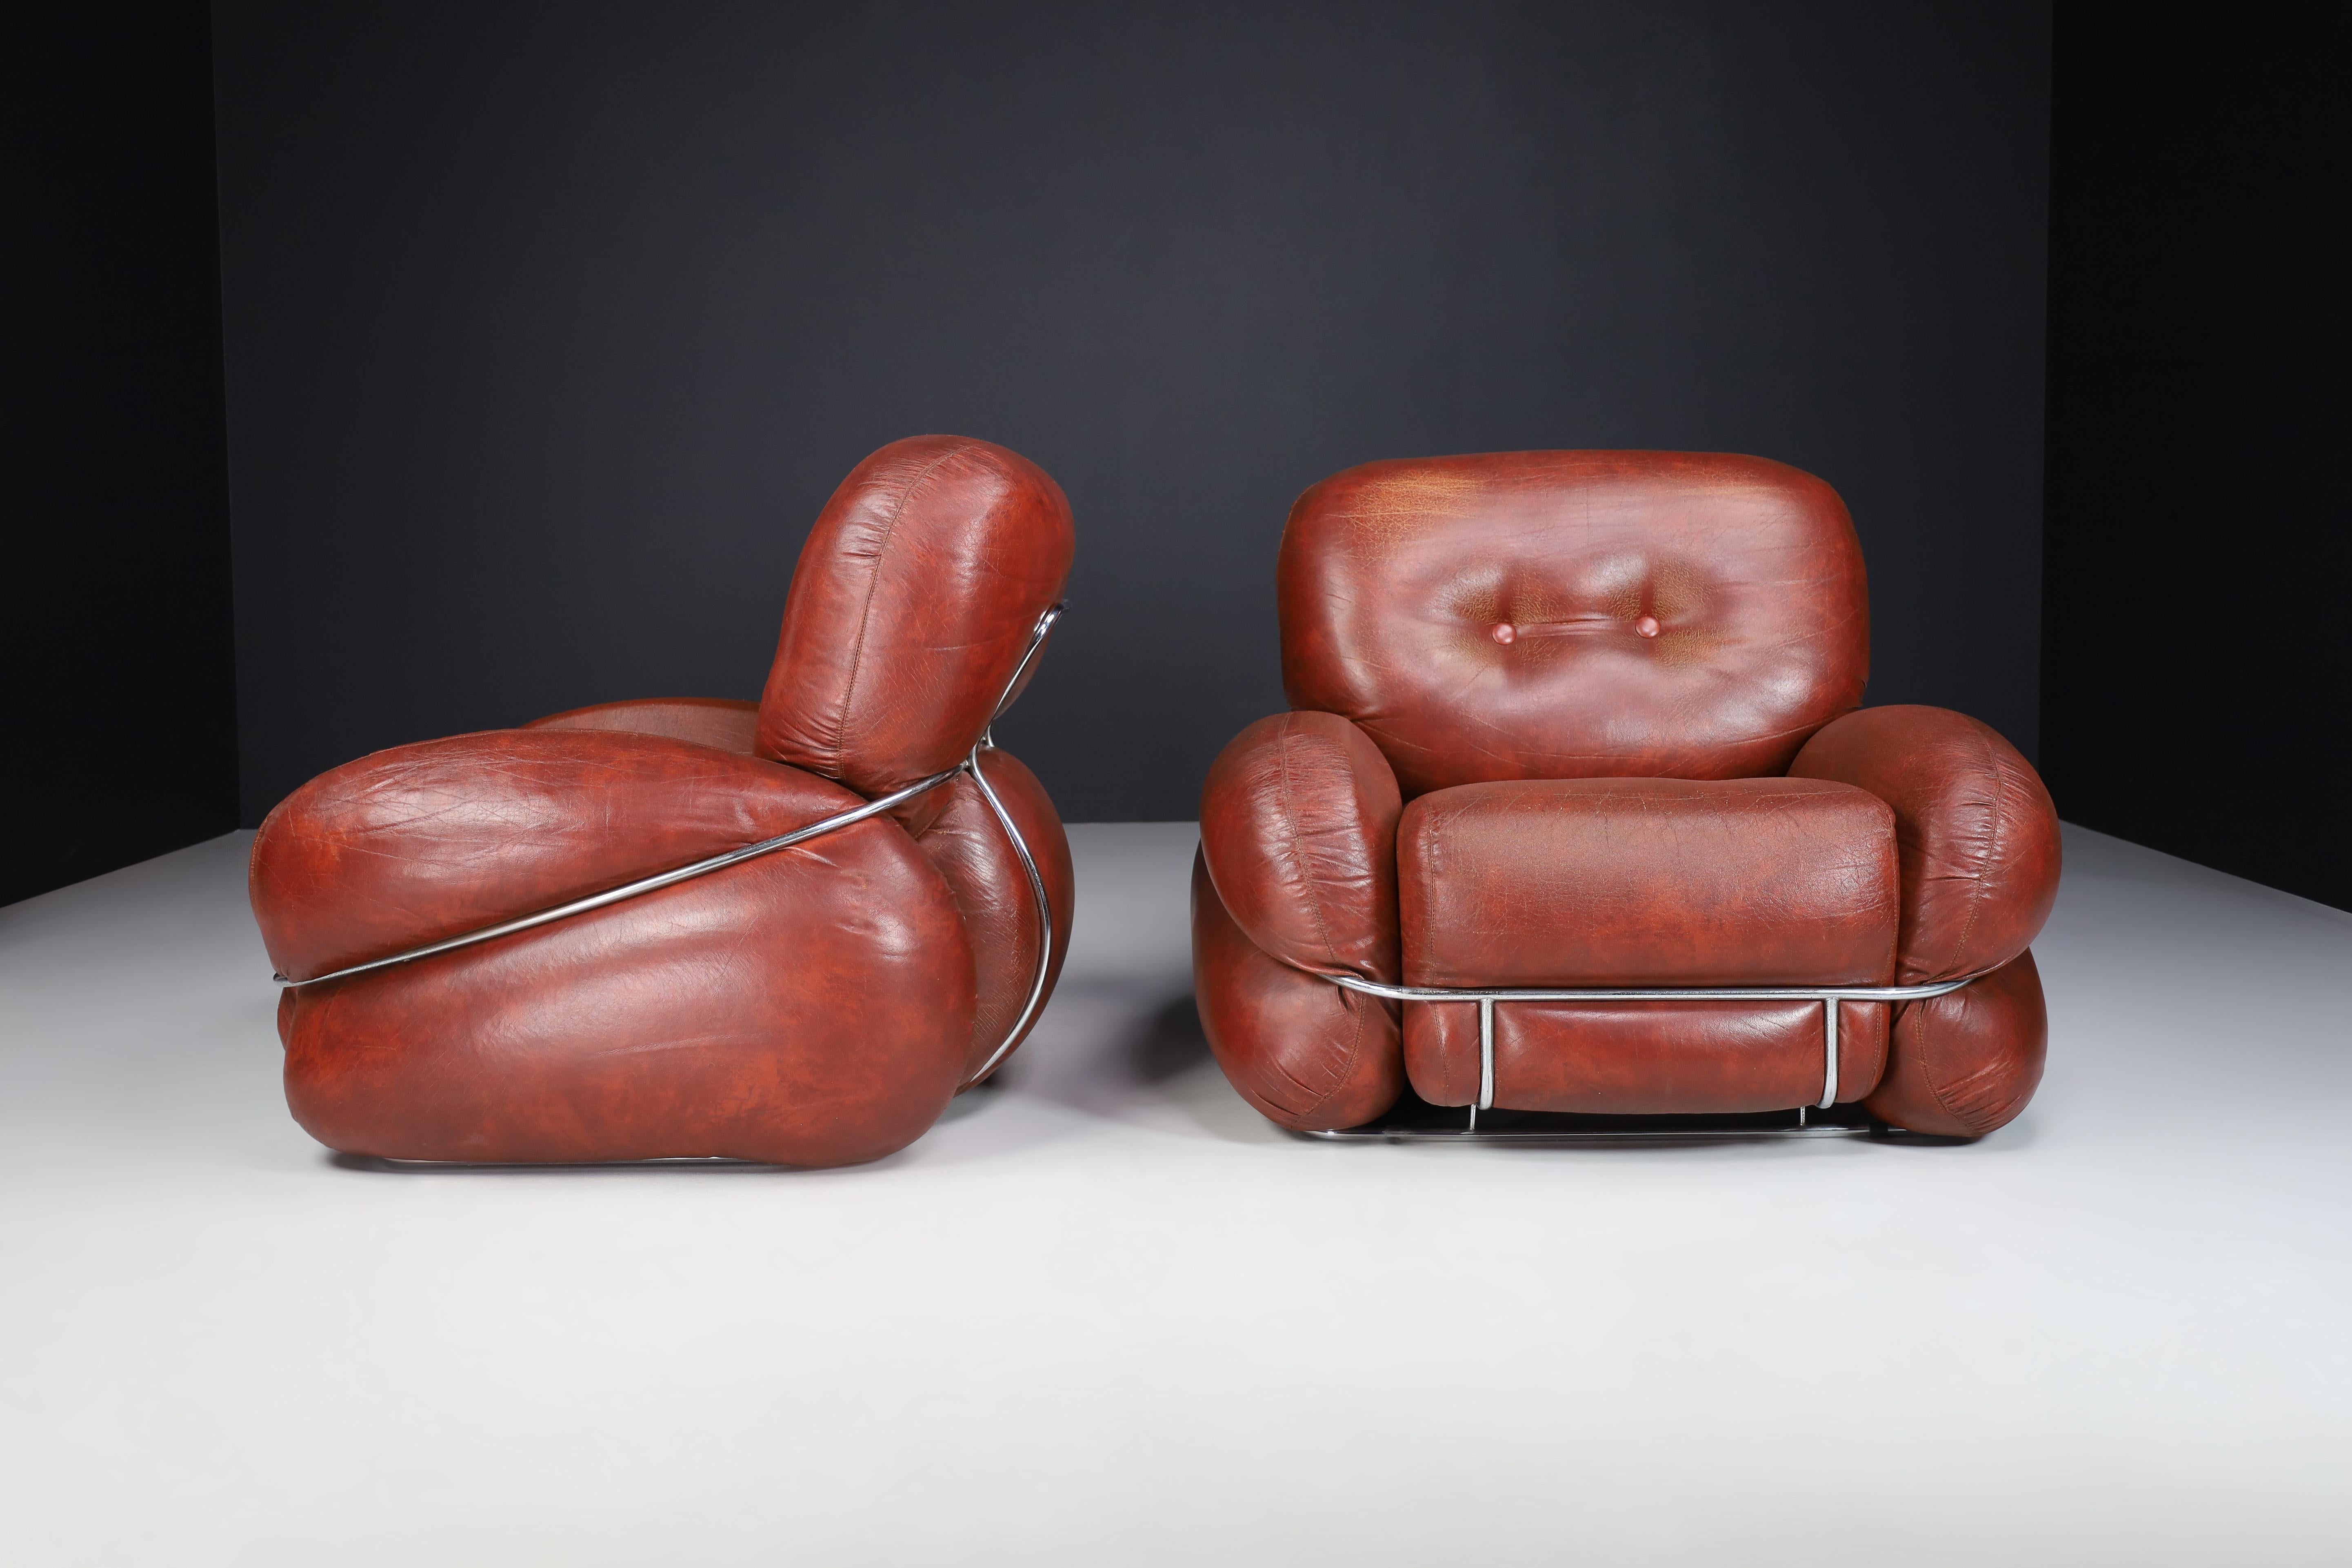 Mid-Century Modern leather lounge / armchairs by Adriano Piazzesi, Italy 1970s.

A pair of Adriano Piazzessi Italian 1970's generously proportioned brown tufted leather lounge chairs, with chrome curved supports on the sides, front and back